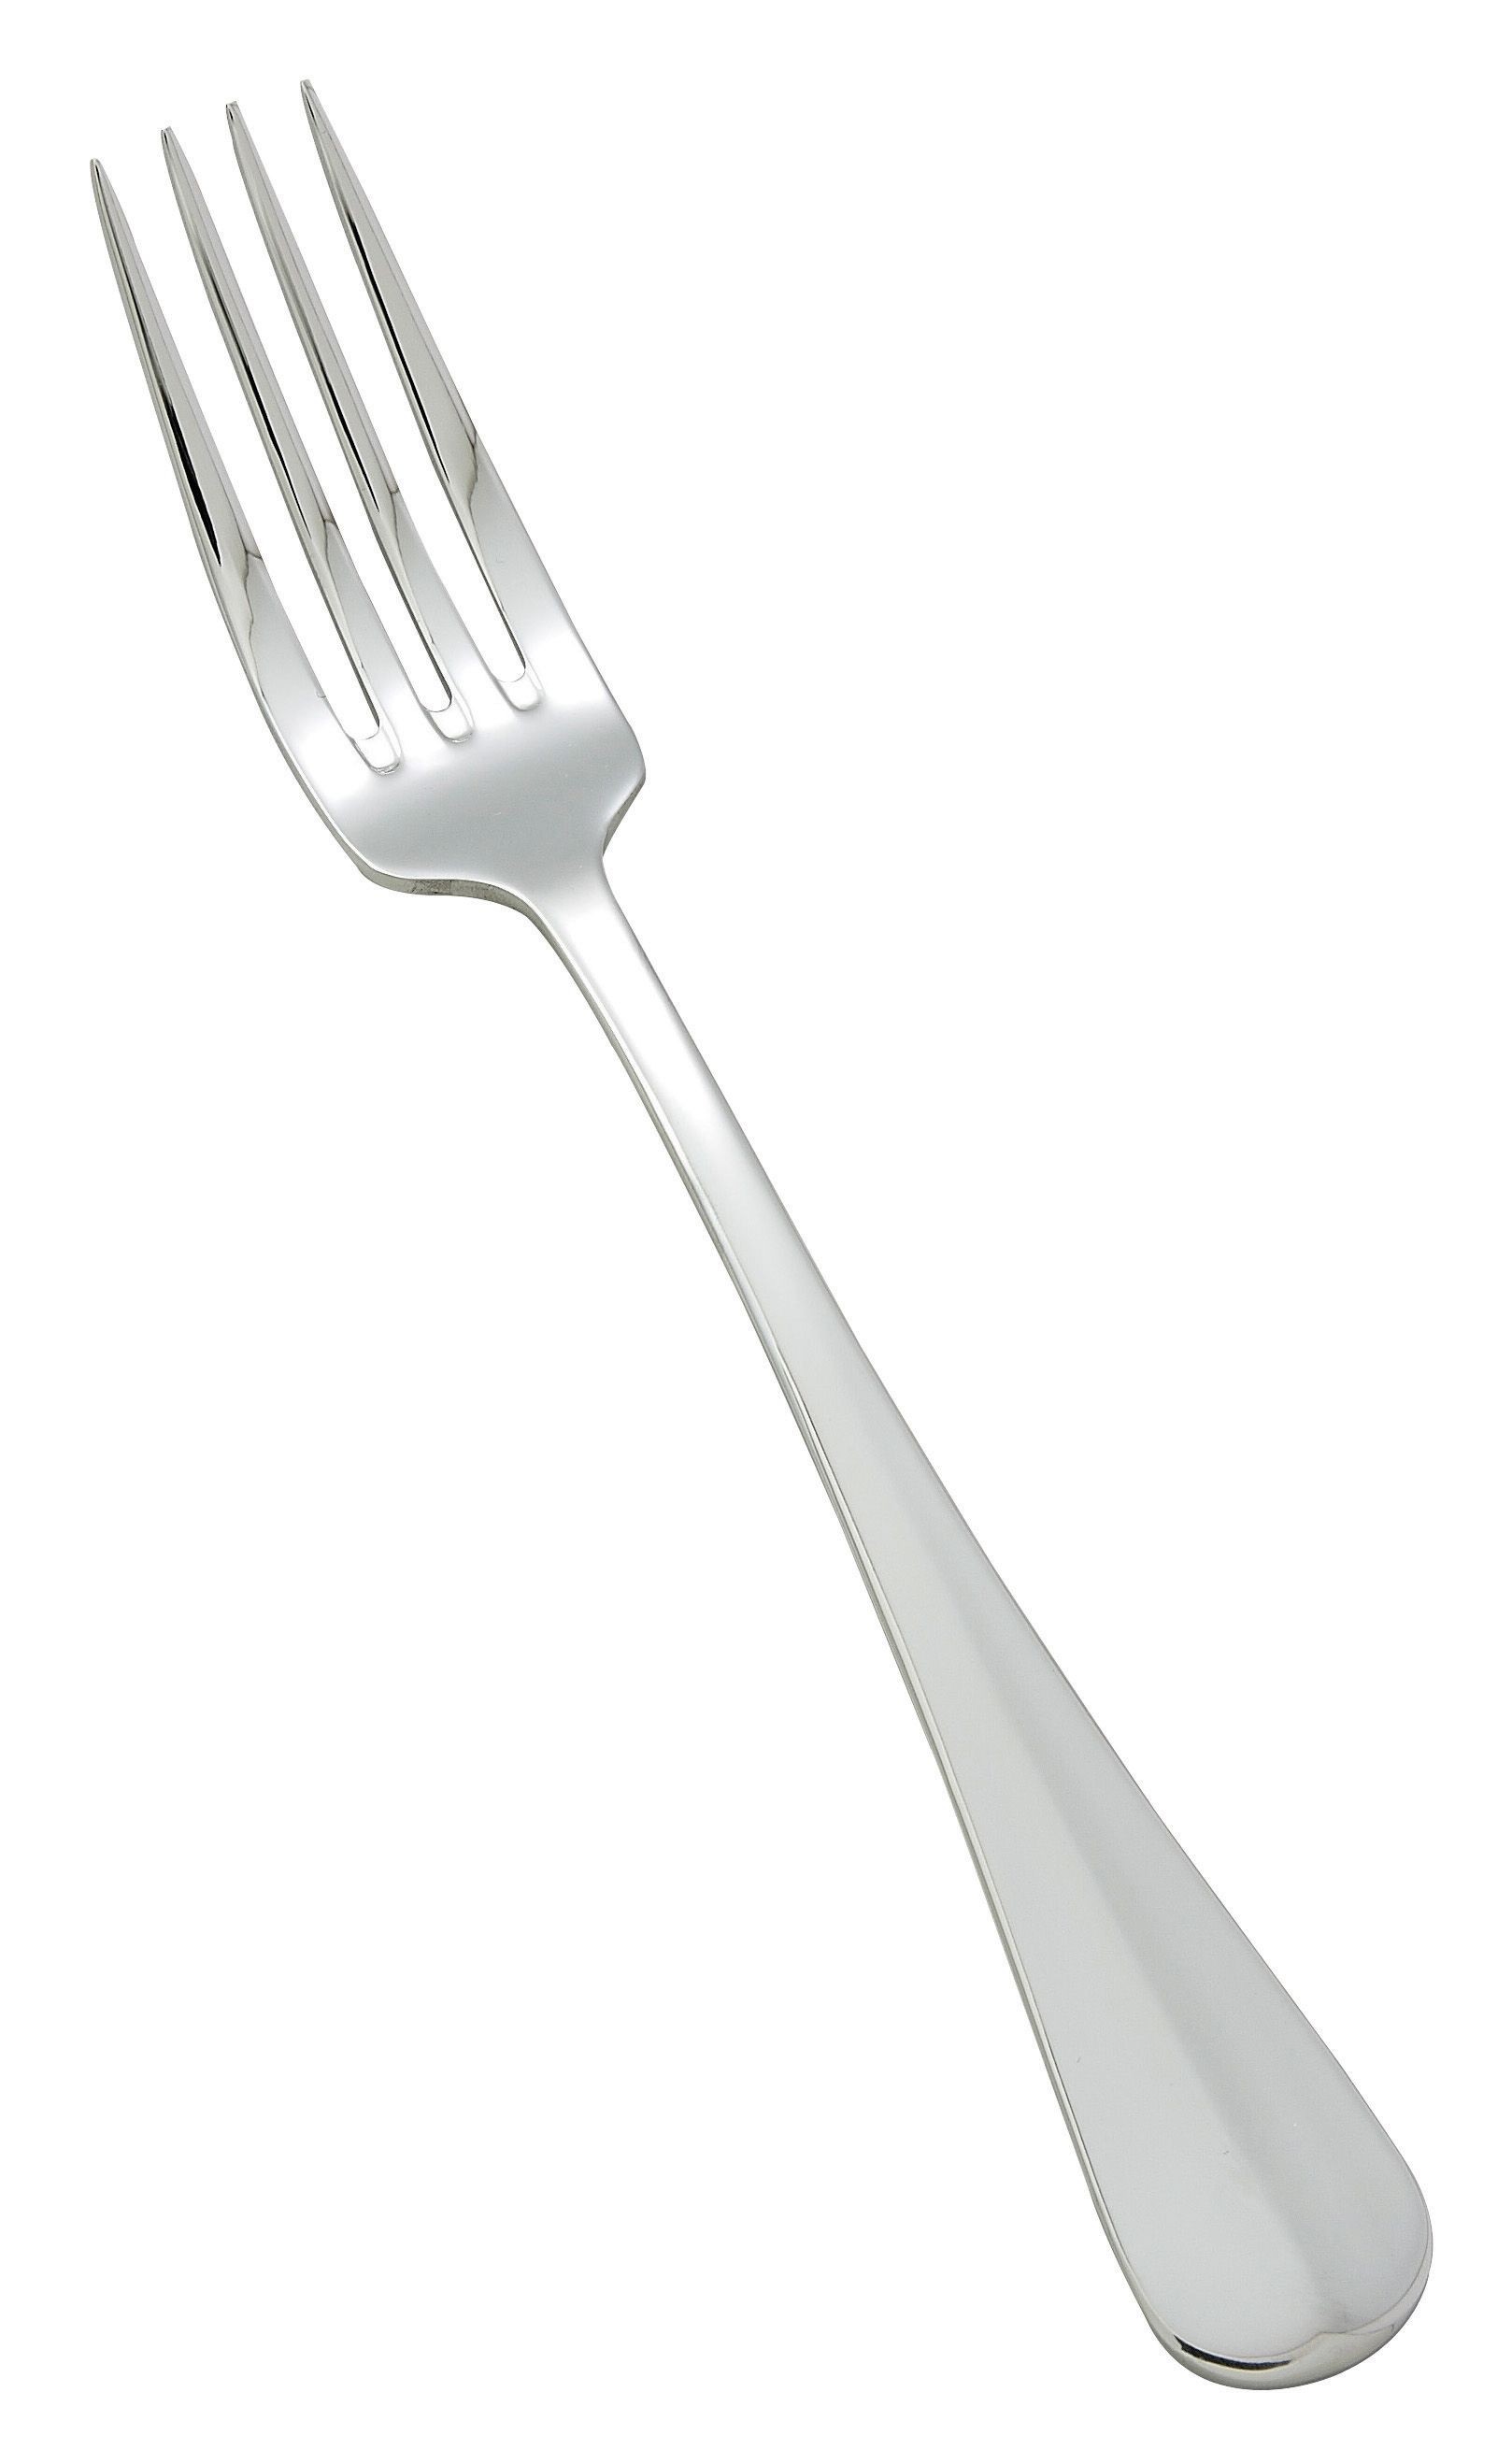 Winco 0034-11 Stanford Extra Heavy Stainless Steel European Table Fork (12/Pack)